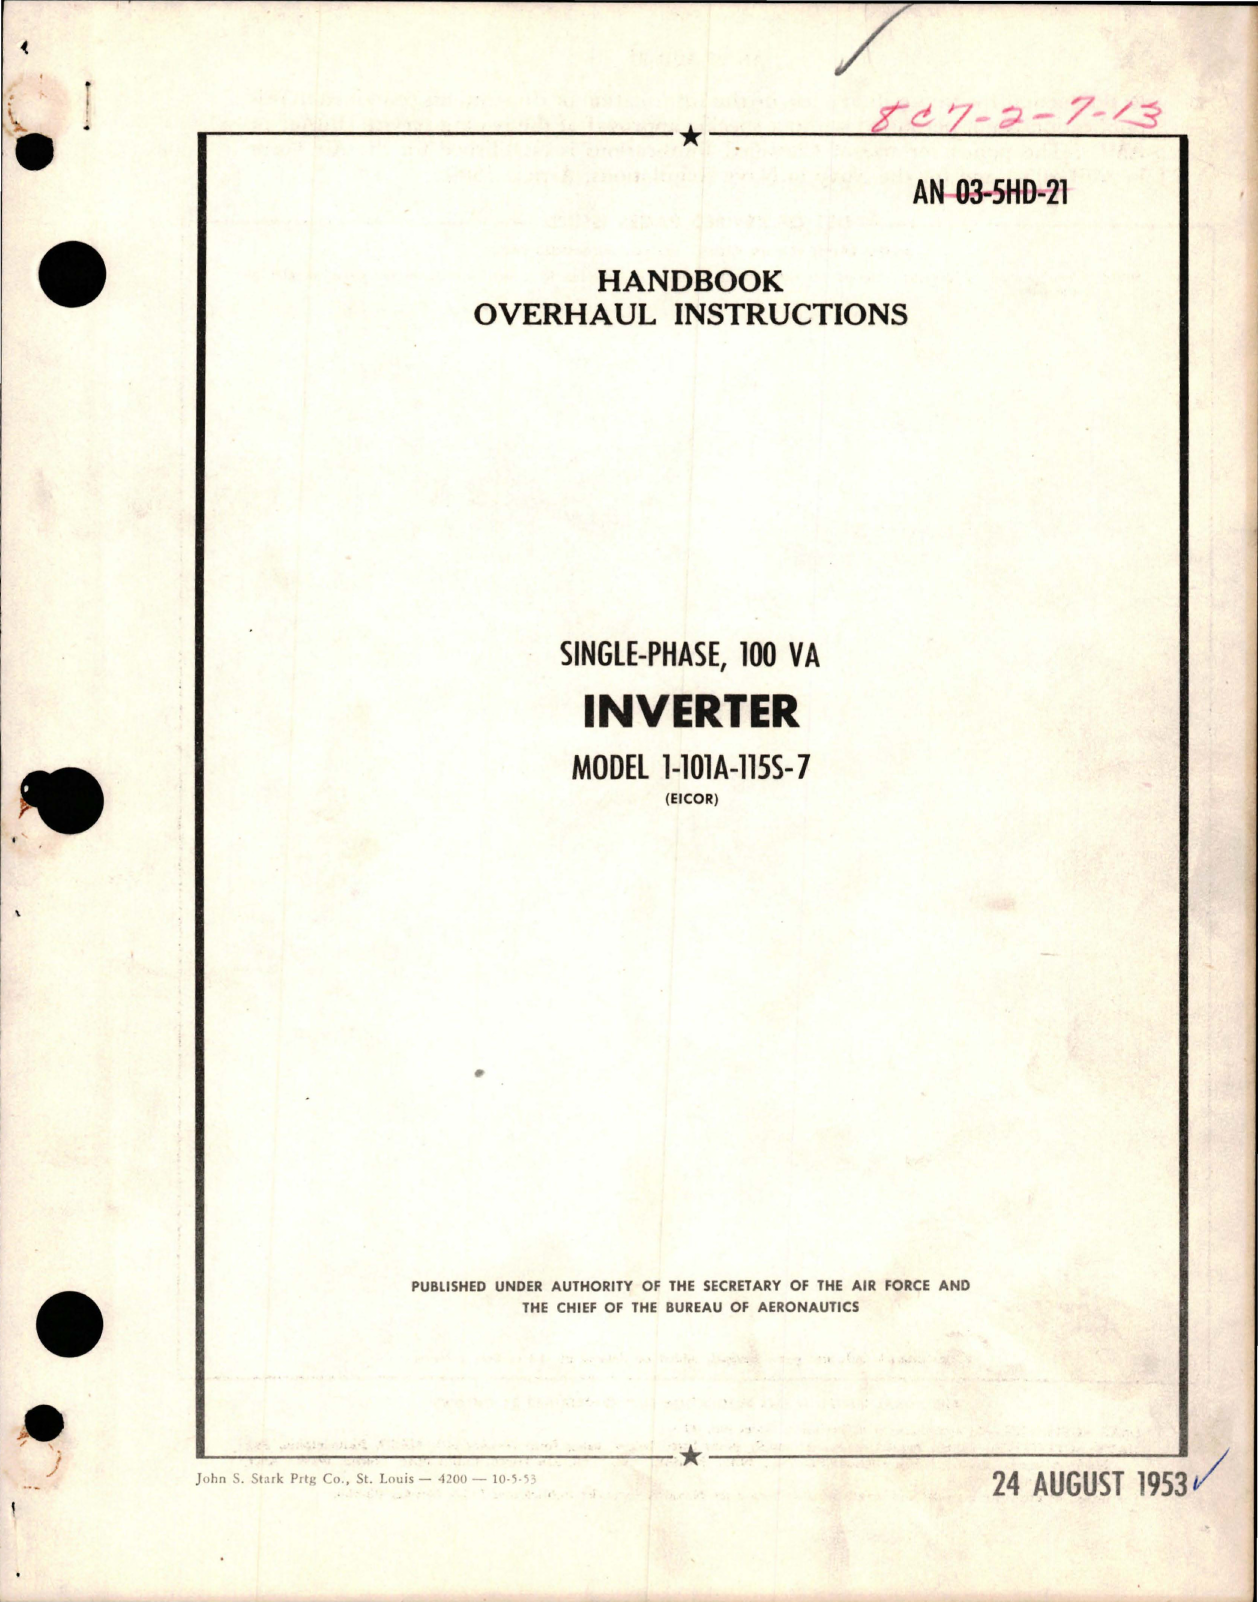 Sample page 1 from AirCorps Library document: Overhaul Instructions for Single Phase 100 VA Inverter - Model 1-101A-115S-7